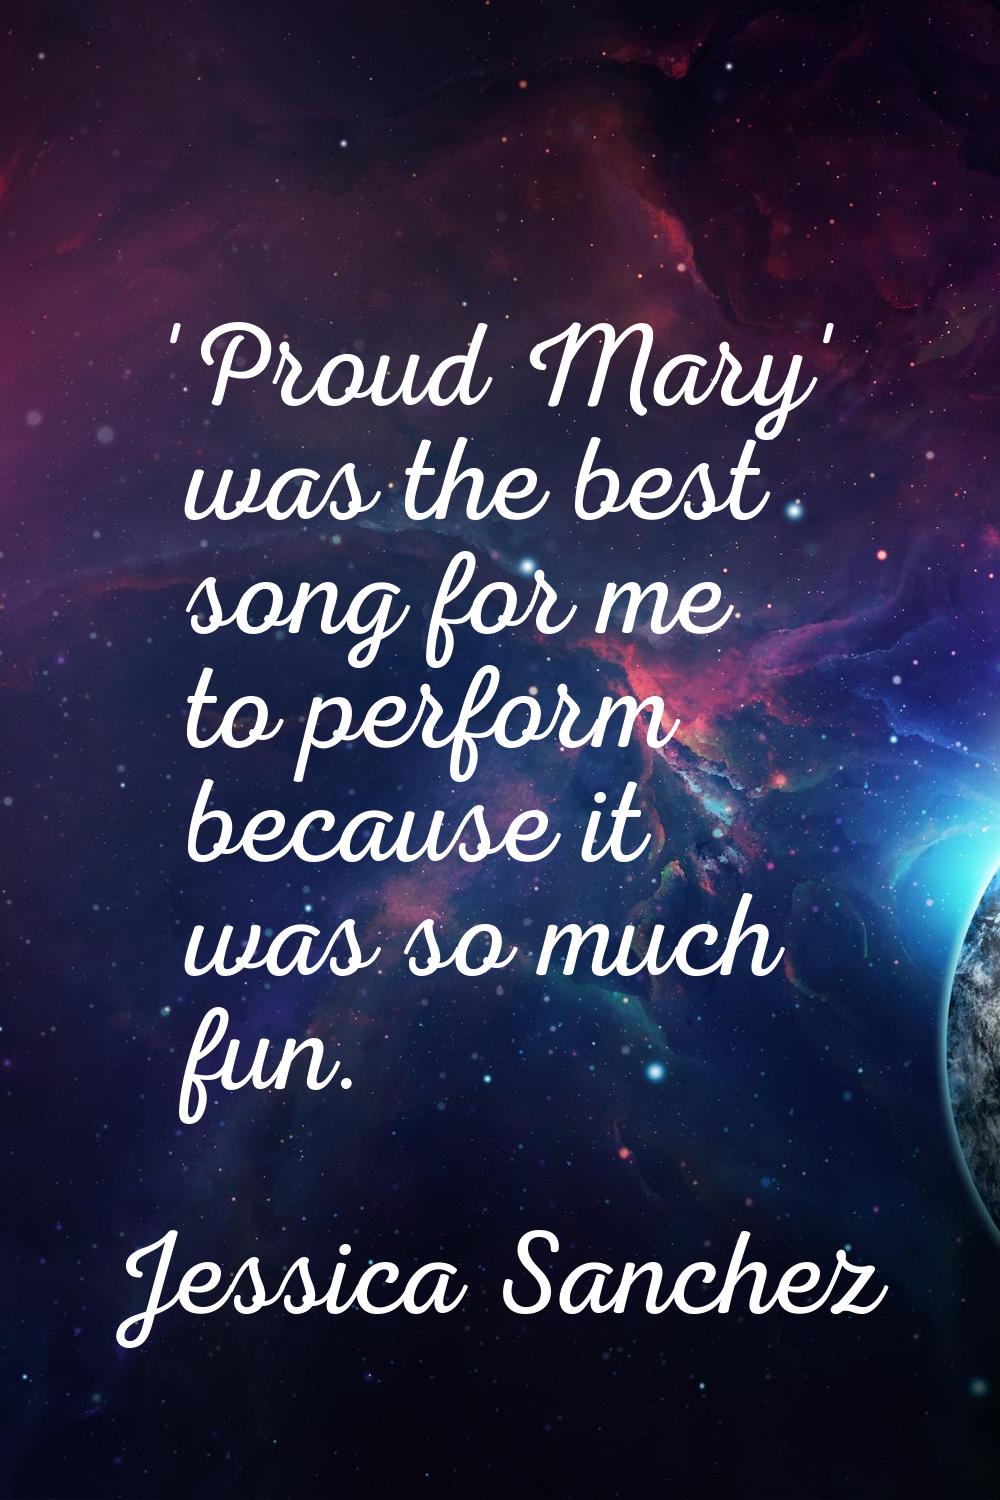 'Proud Mary' was the best song for me to perform because it was so much fun.